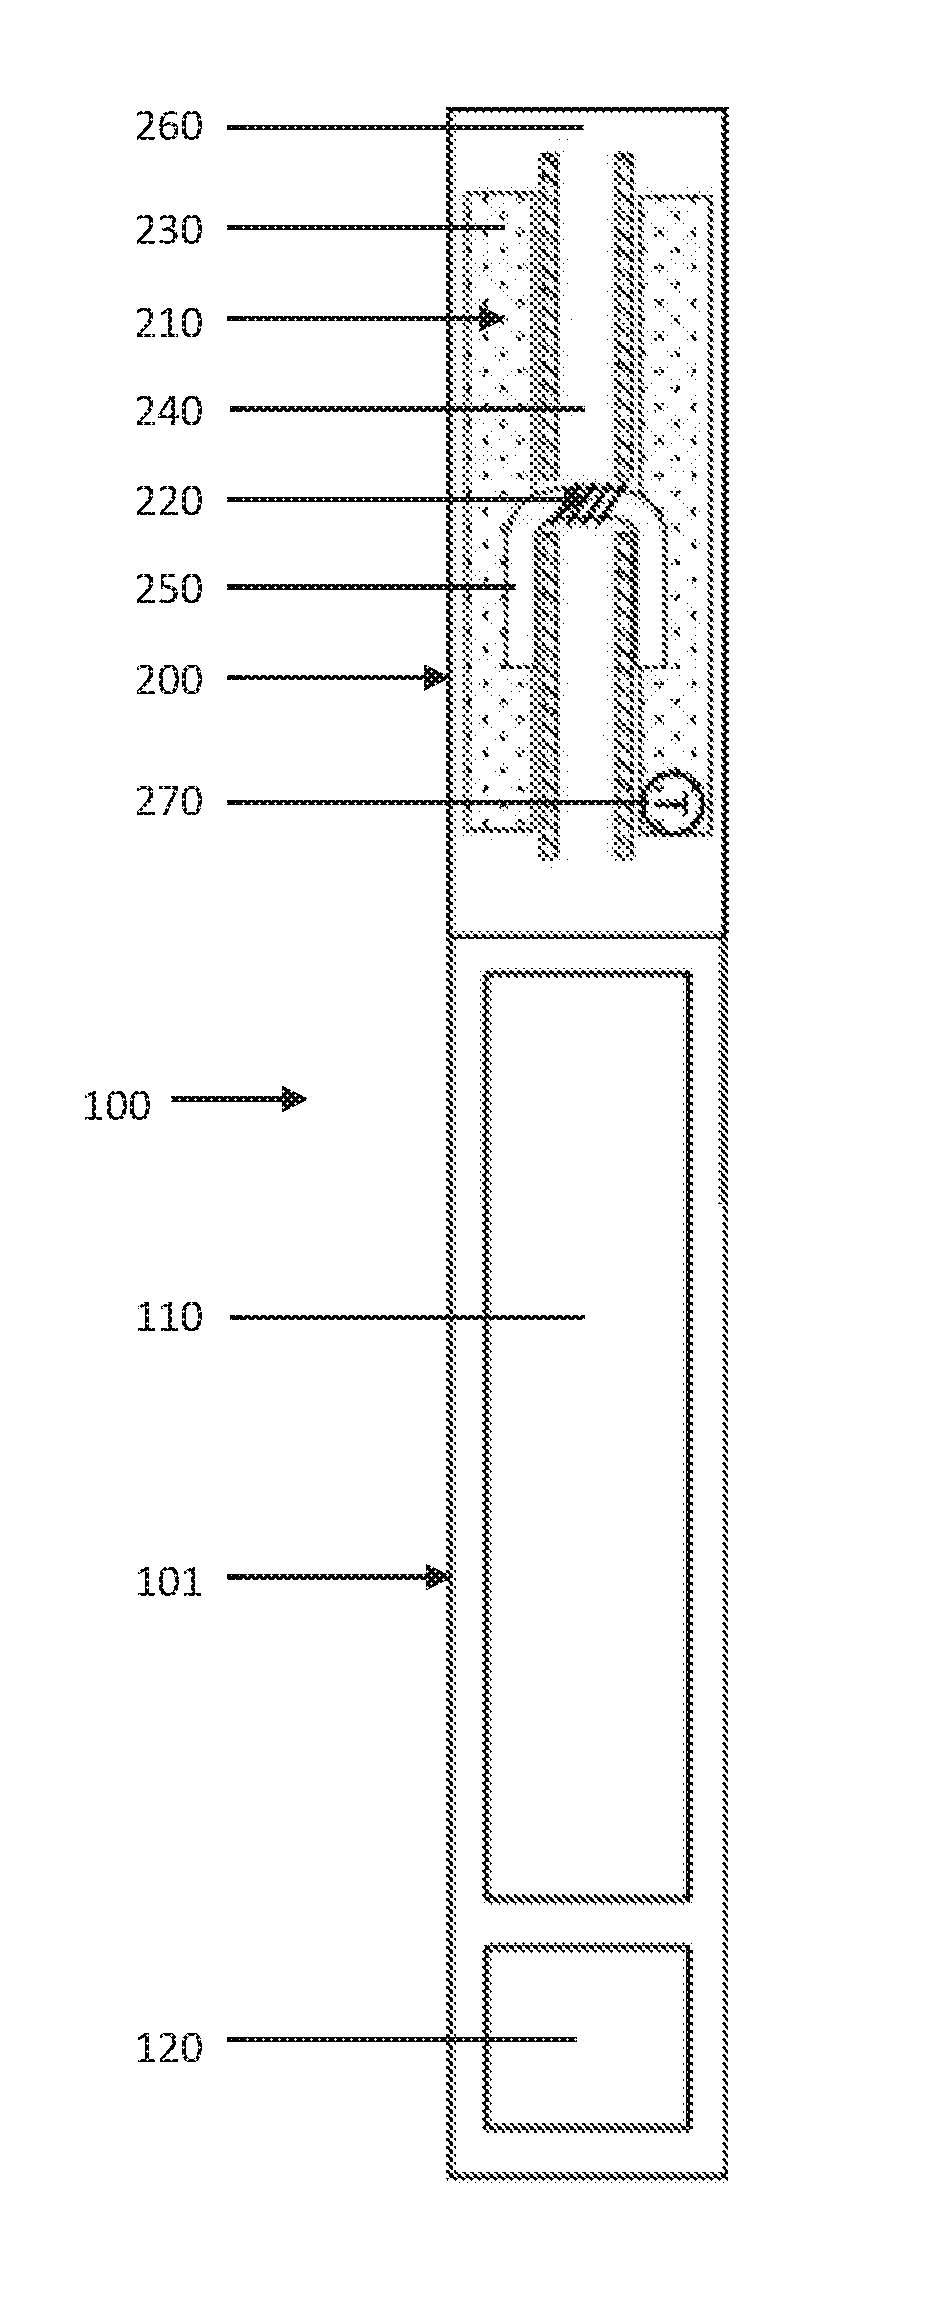 Electrically operated aerosol-generating system with temperature sensor